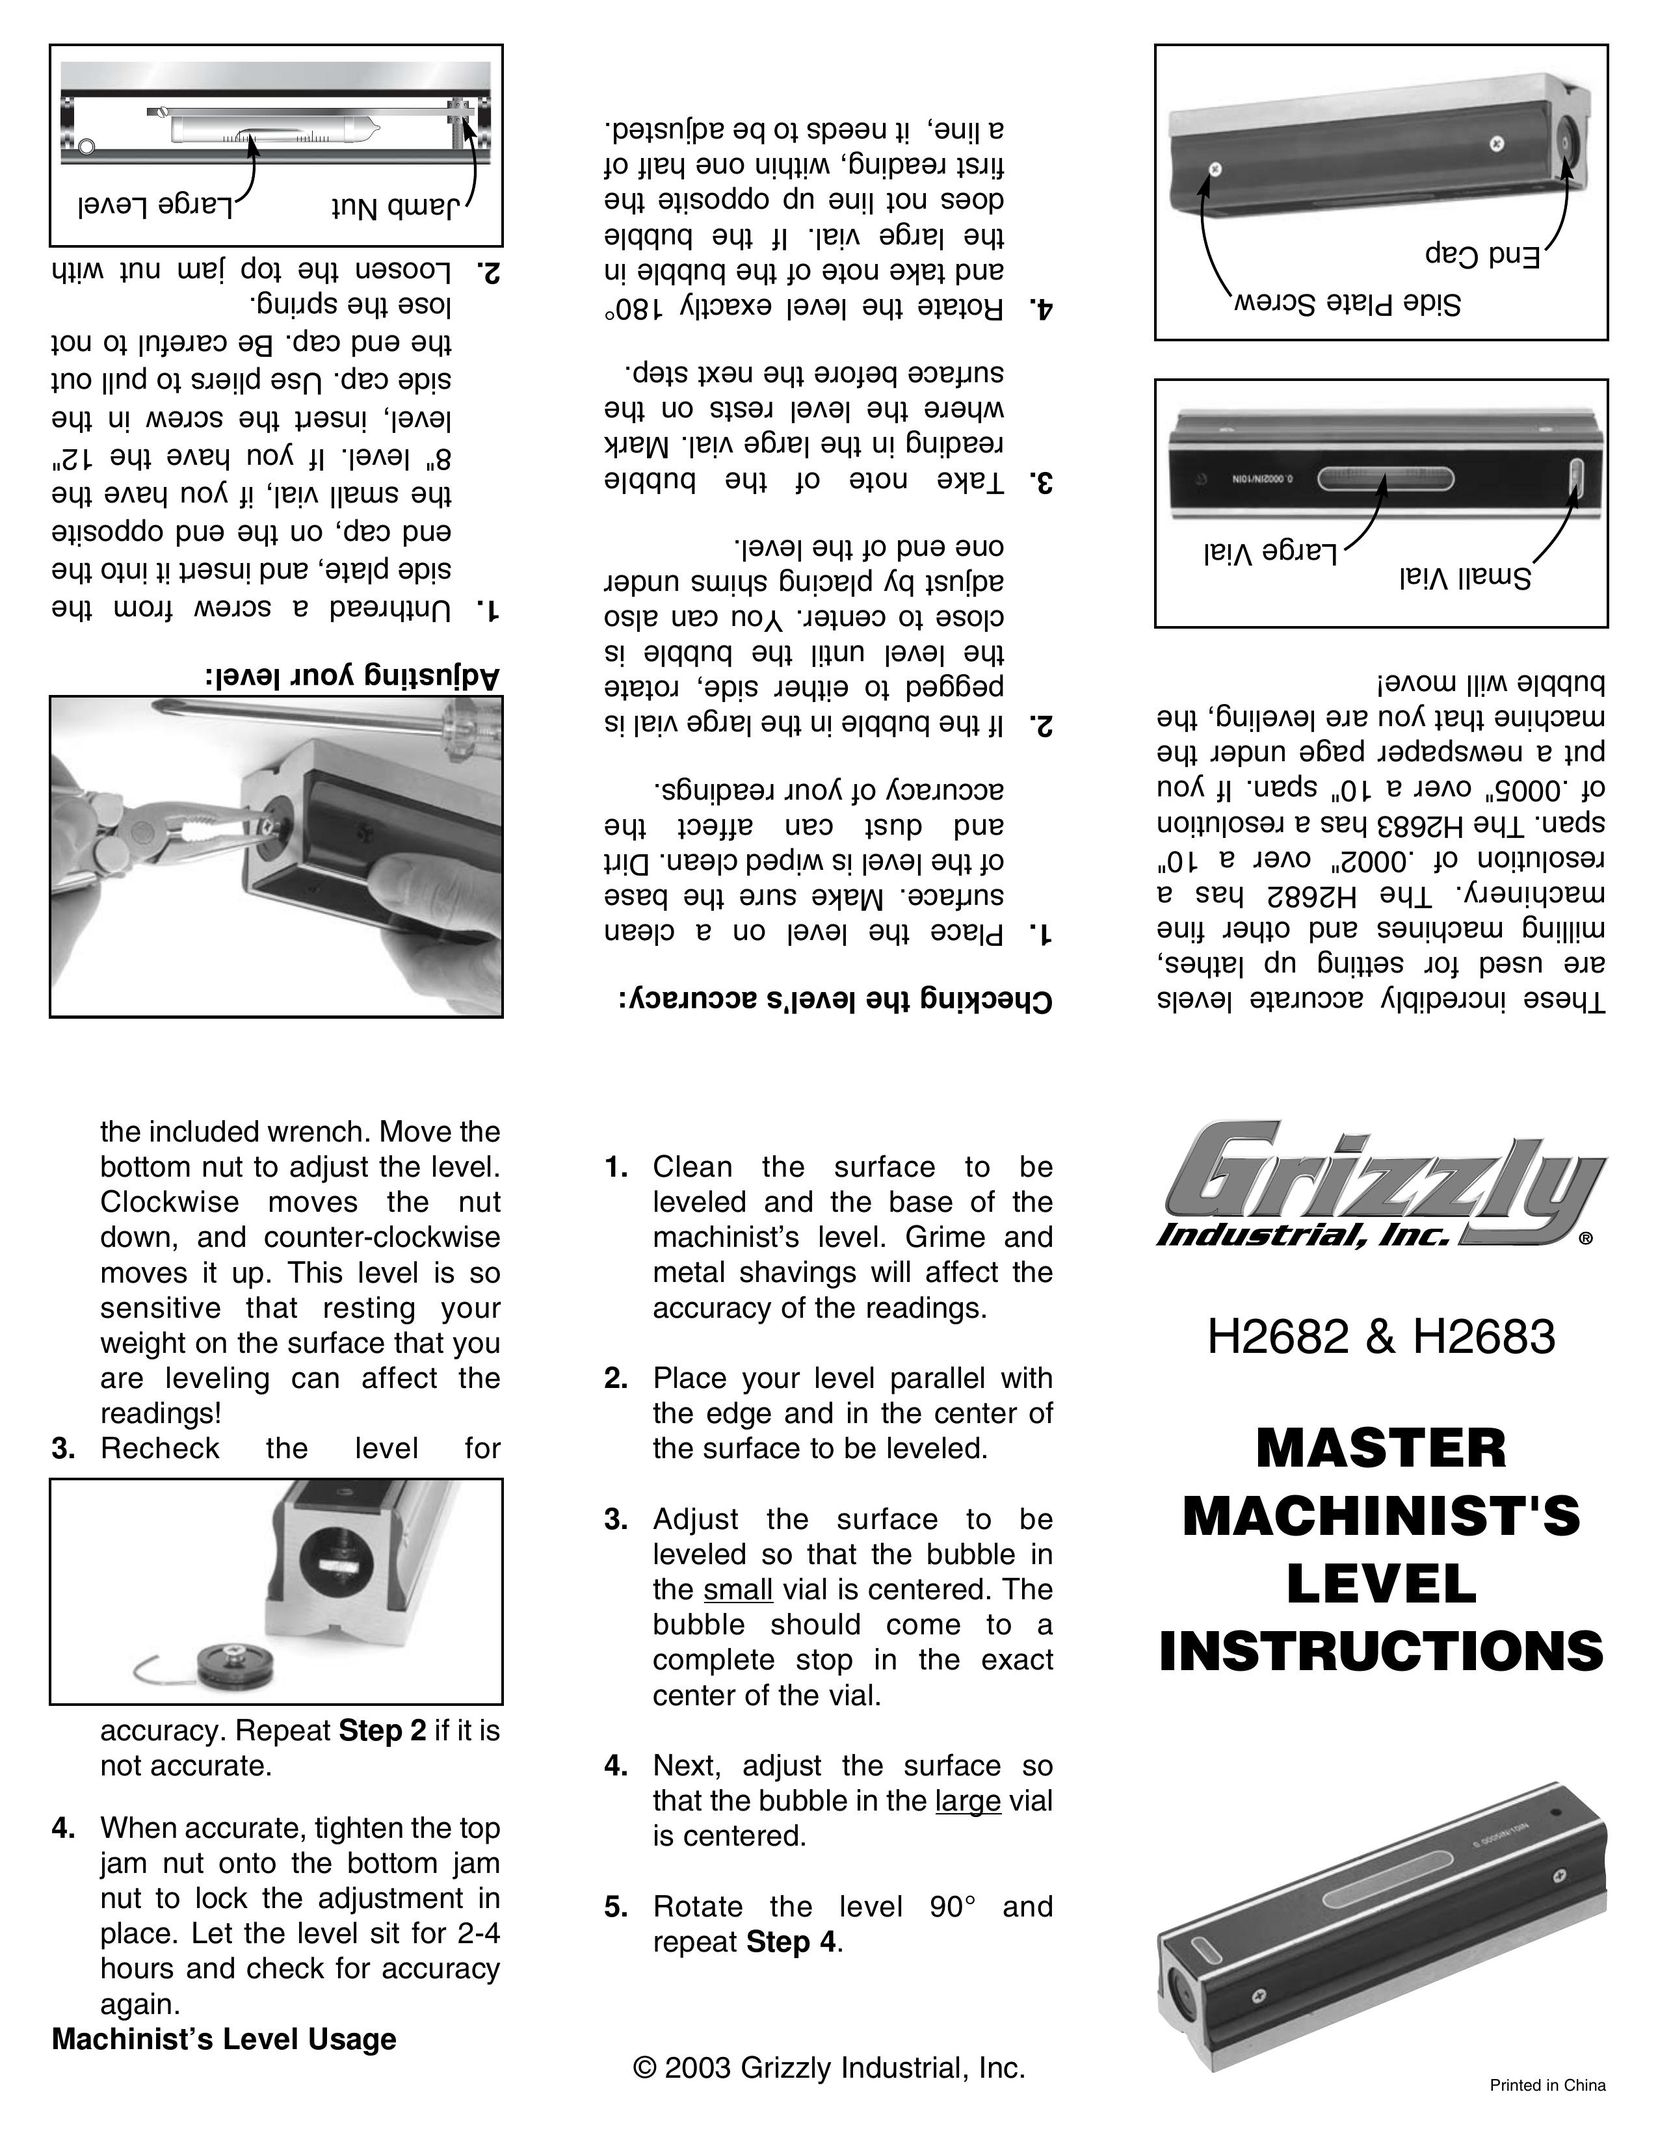 Grizzly H2682 Laser Level User Manual